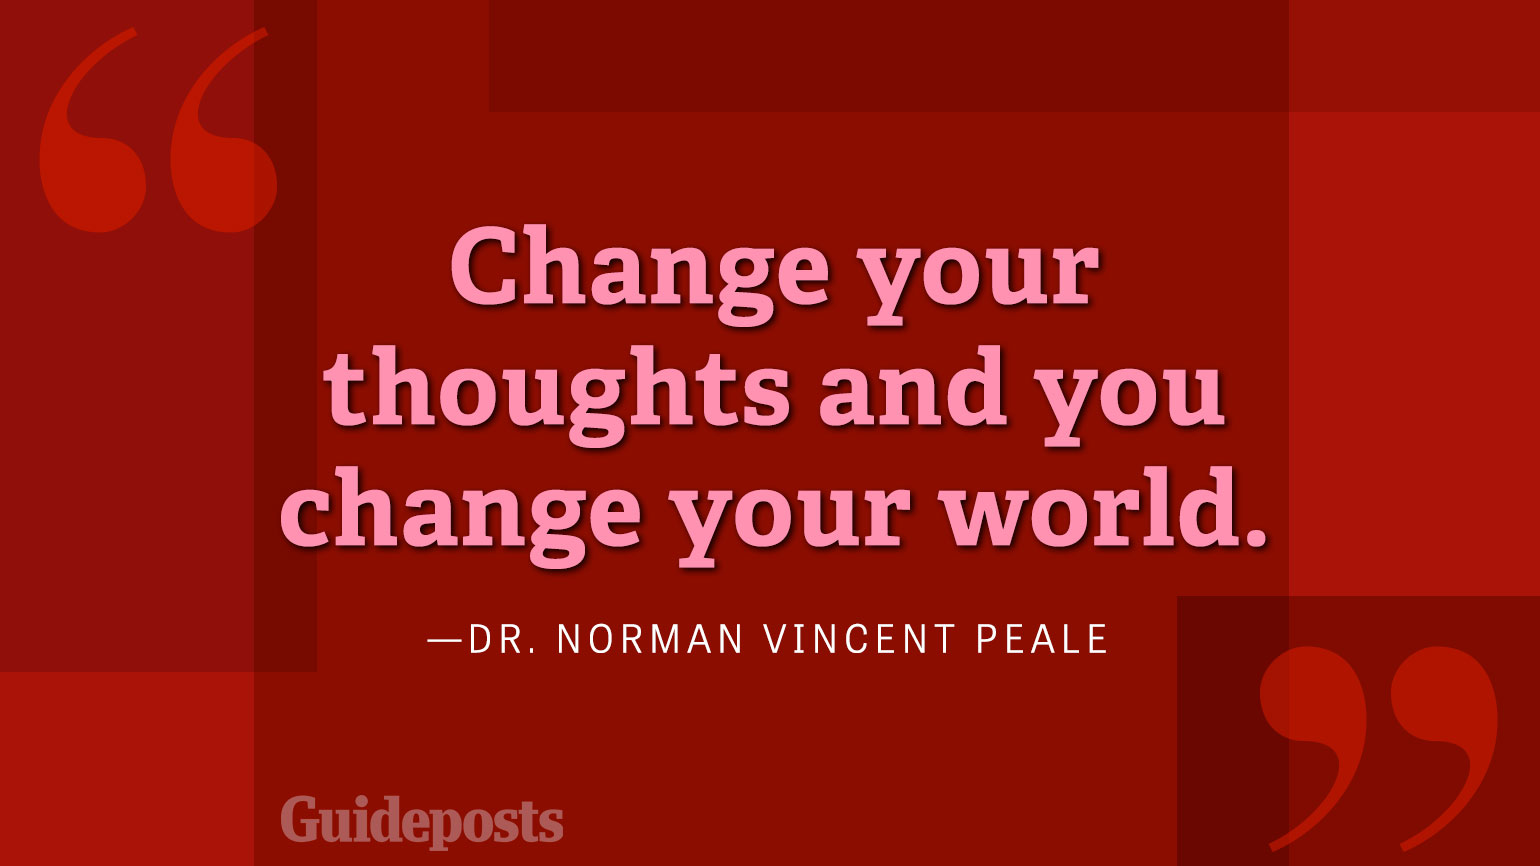 Change your thoughts and you change the world.